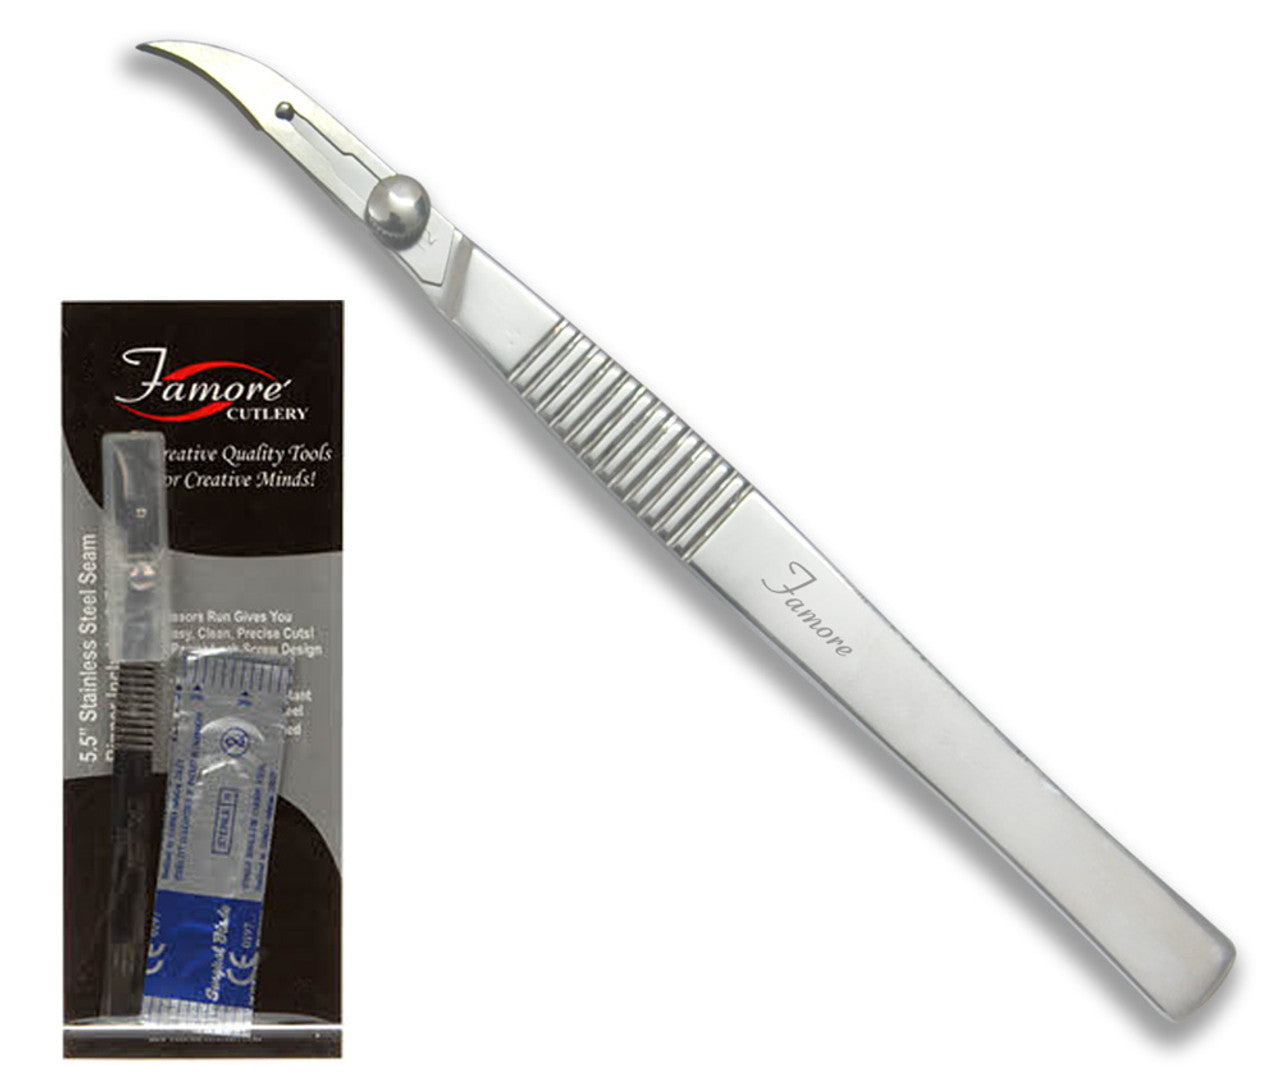 5.5" Surgical Style Seam Ripper